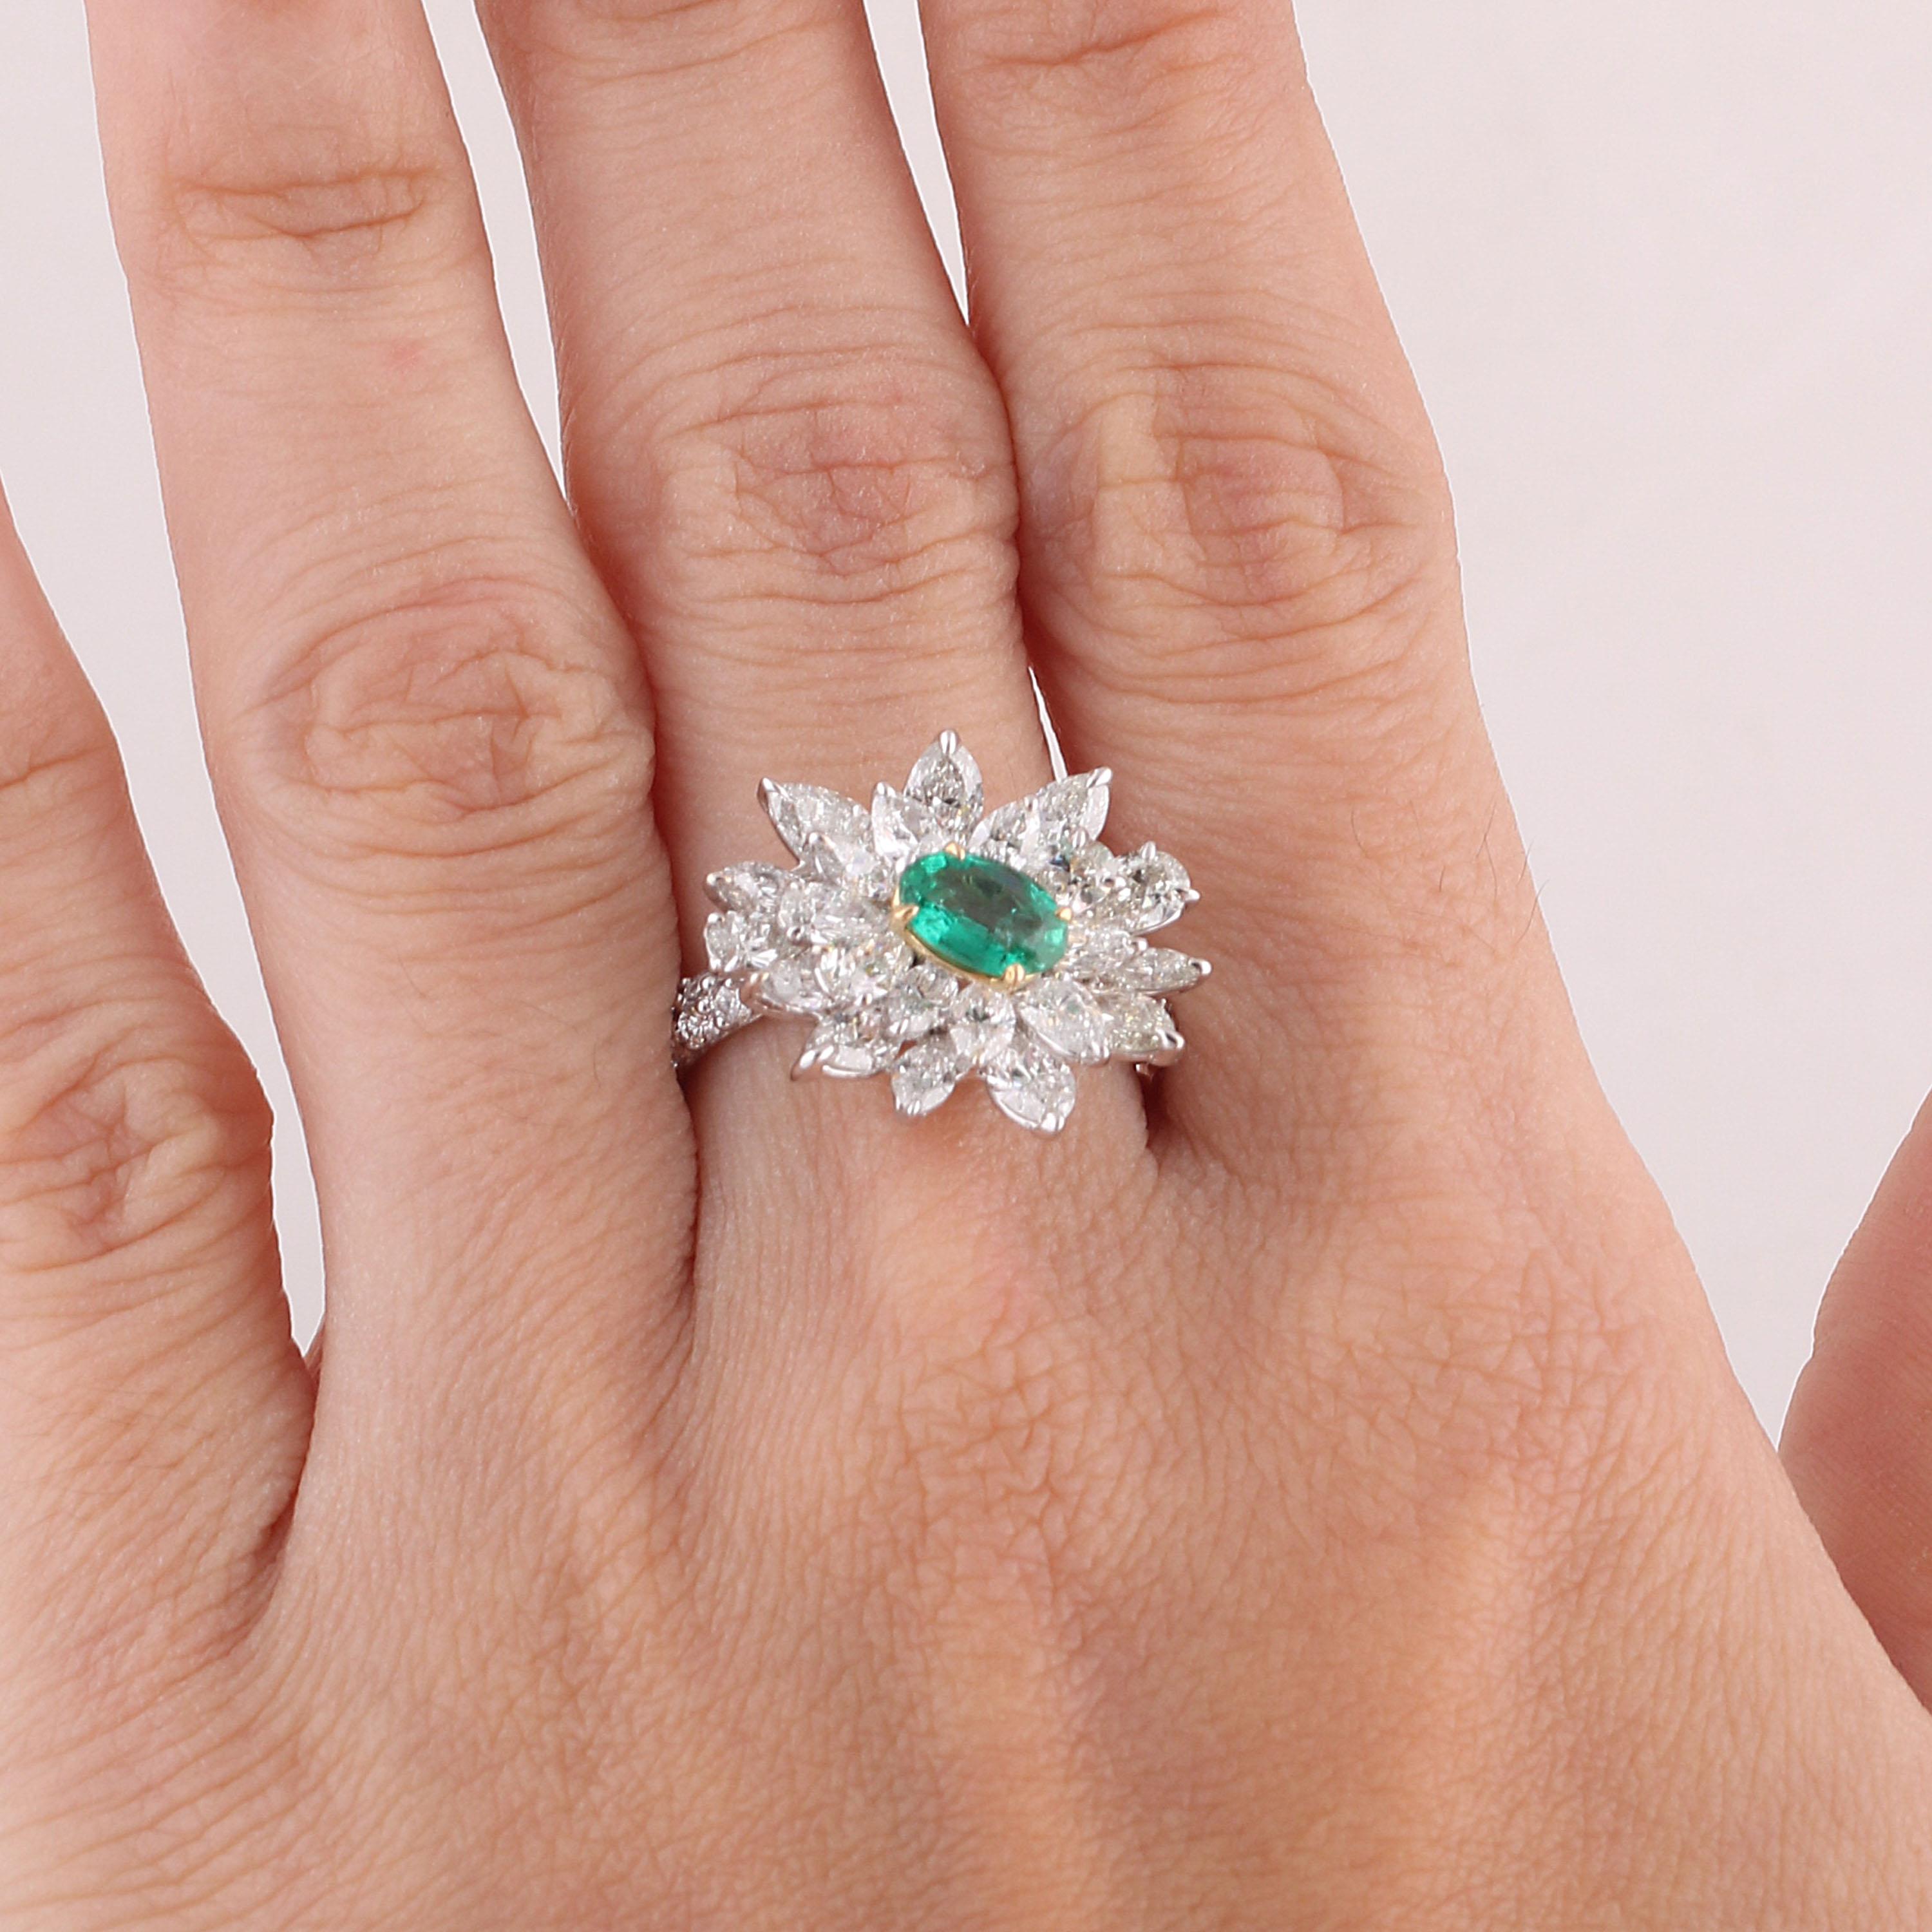 Gross Weight: 6.71 Grams
Diamond Weight: 3.26 cts
Emerald Weight: 0.62 cts
Ring Size: US 6.5 (Resizing can be Done)
IGI Certification can be done on request.

Video of the product can be shared on request.

Emeralds have the distinct power of making